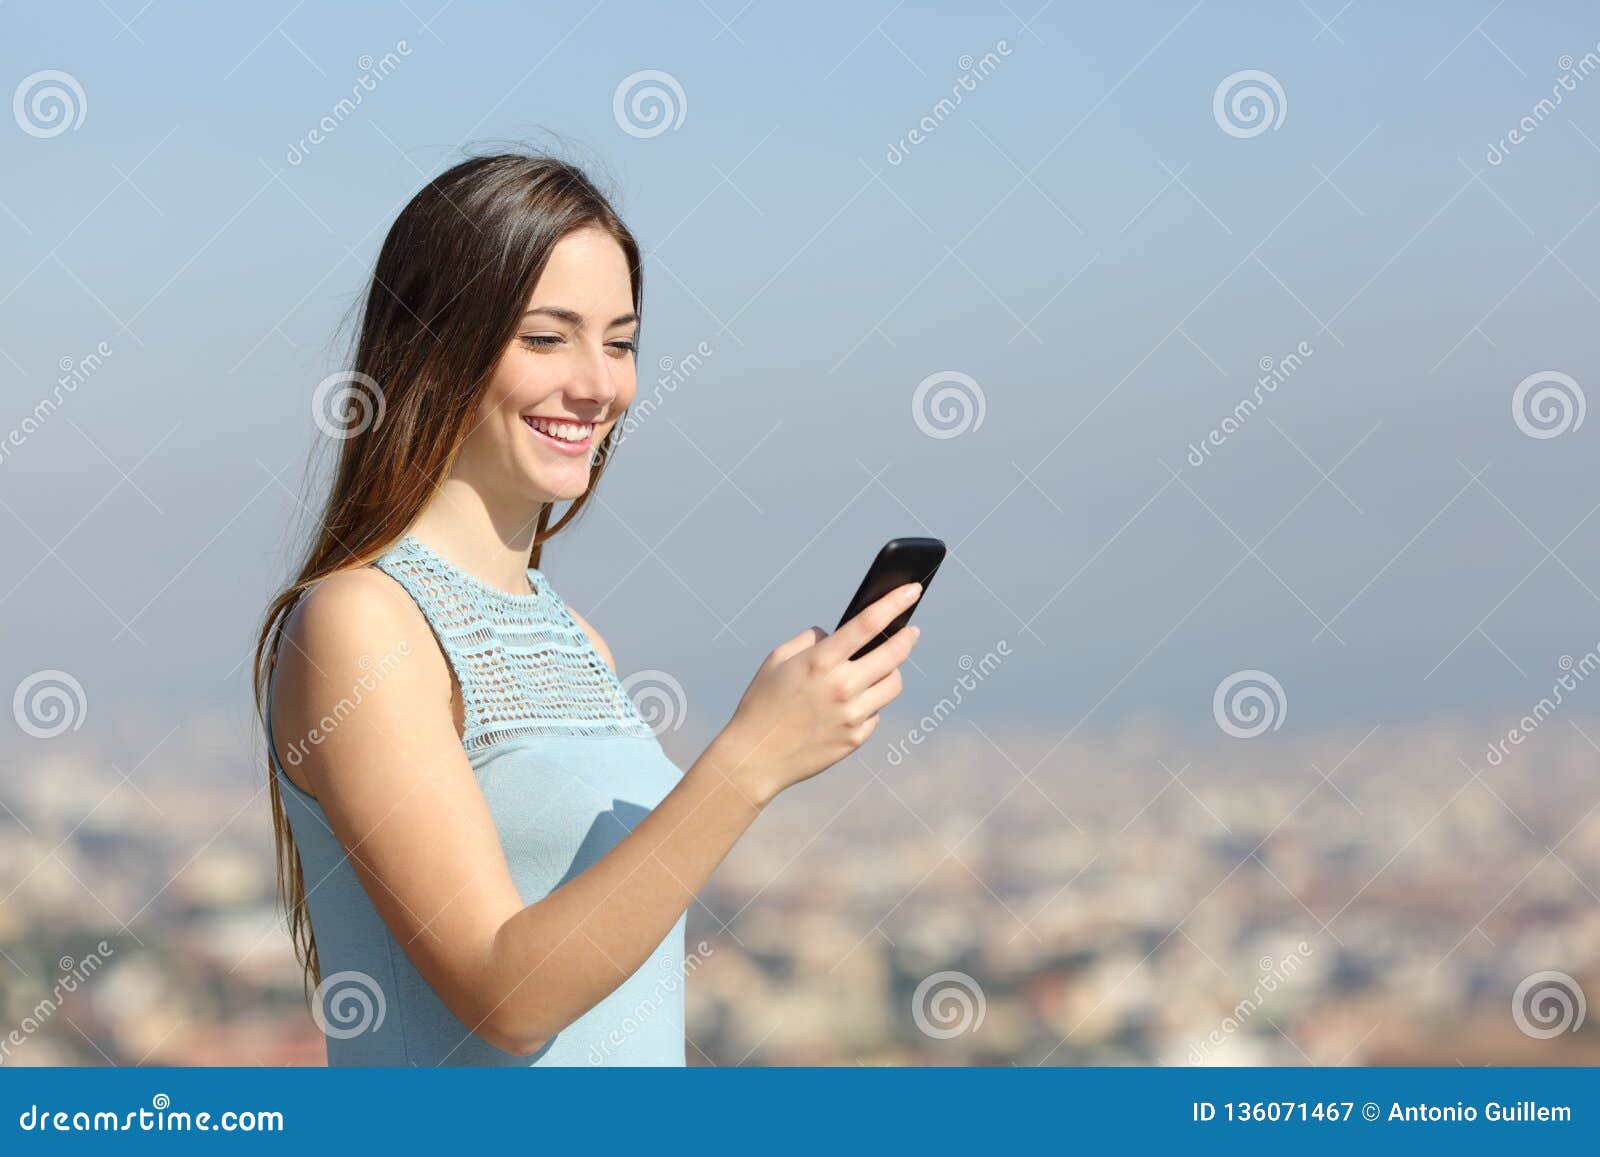 happy woman using a smart phone in a city outskirts